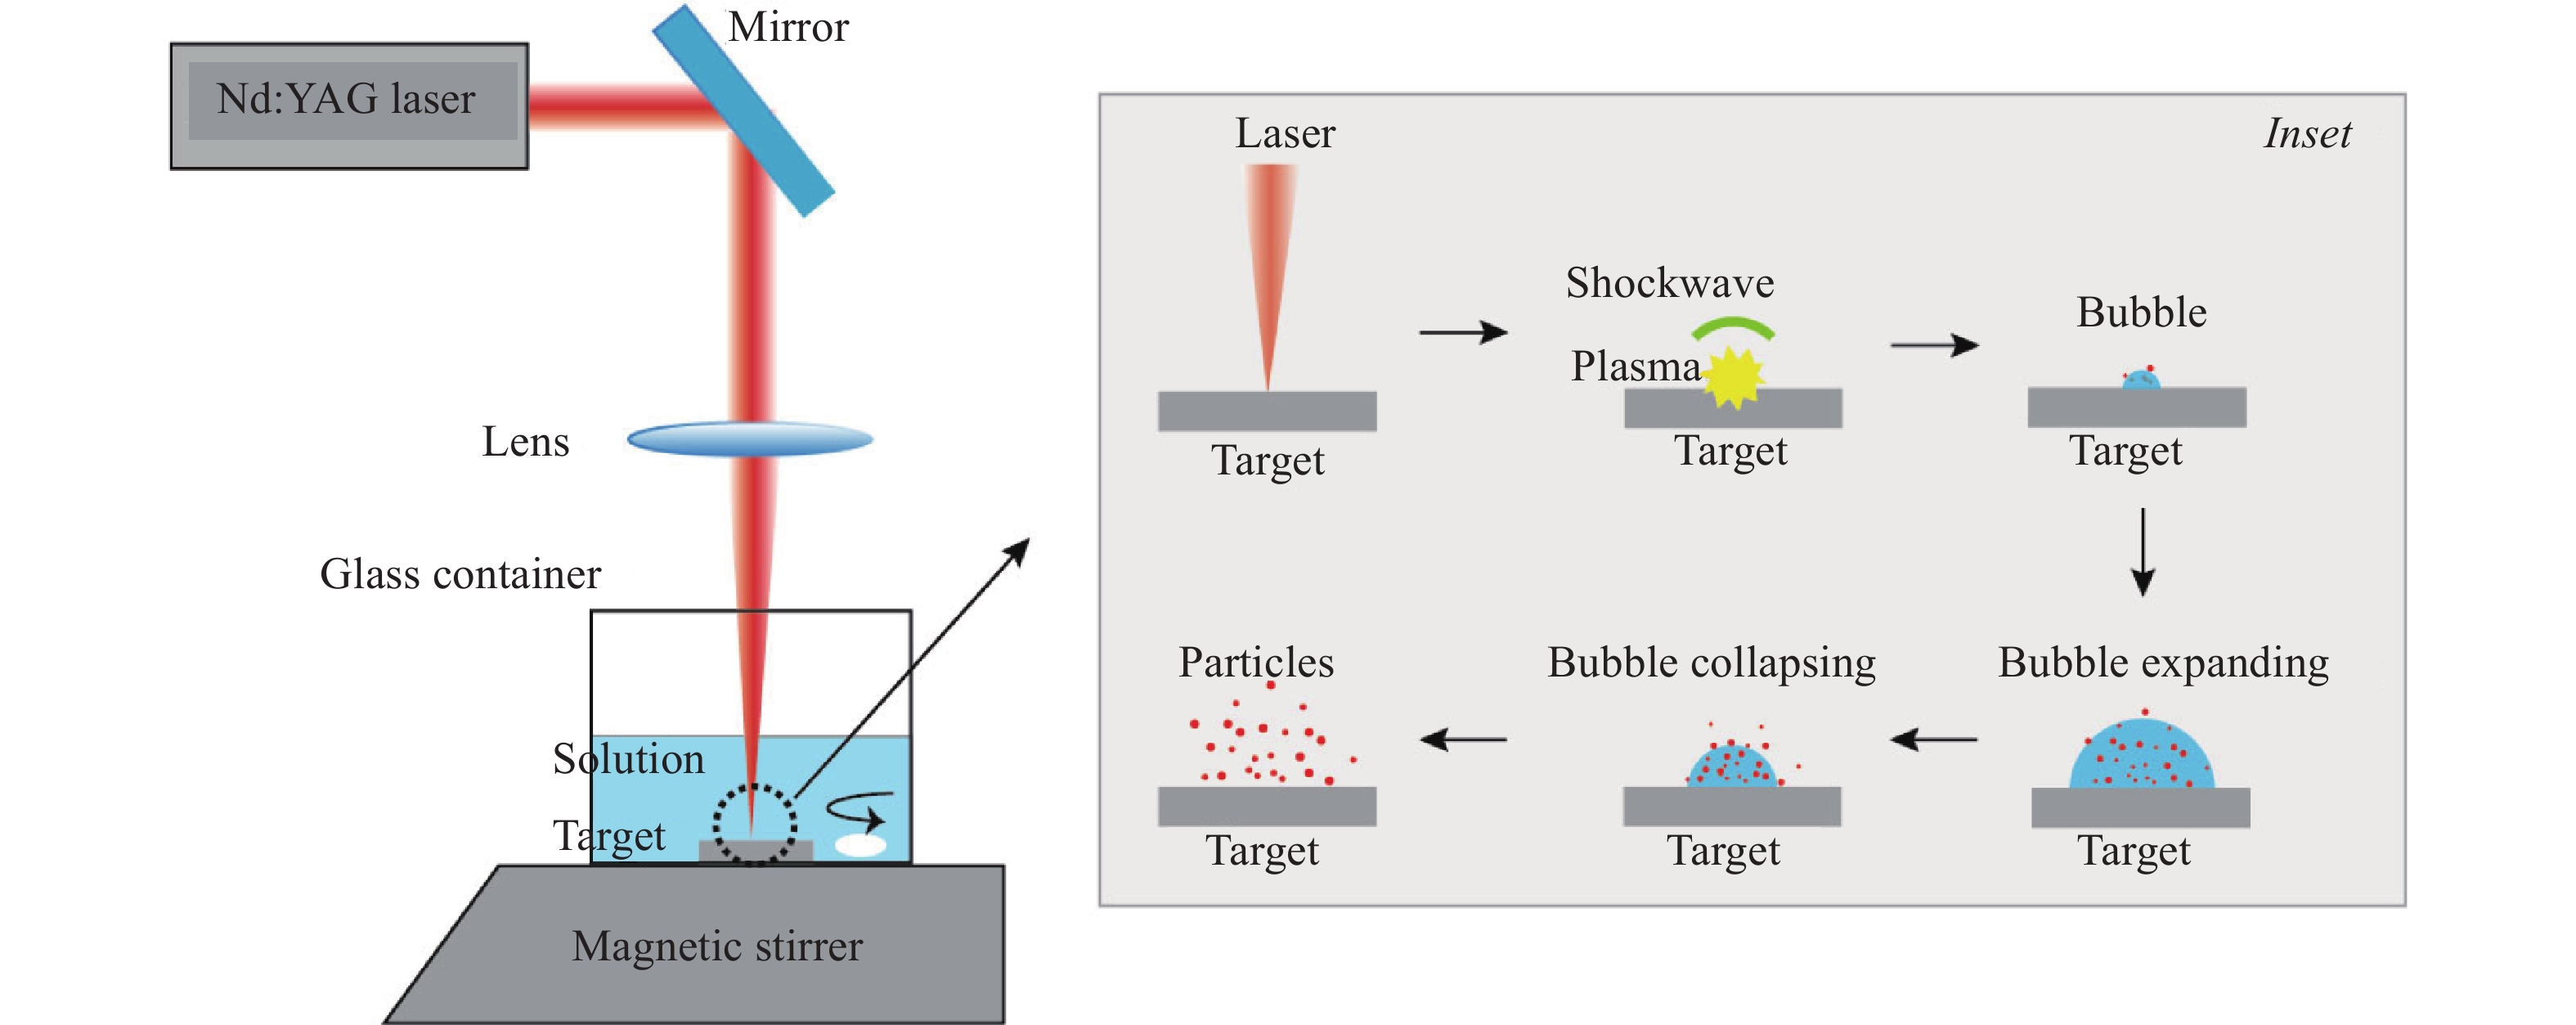 Experimental setup of laser ablation in liquid for materials fabrication